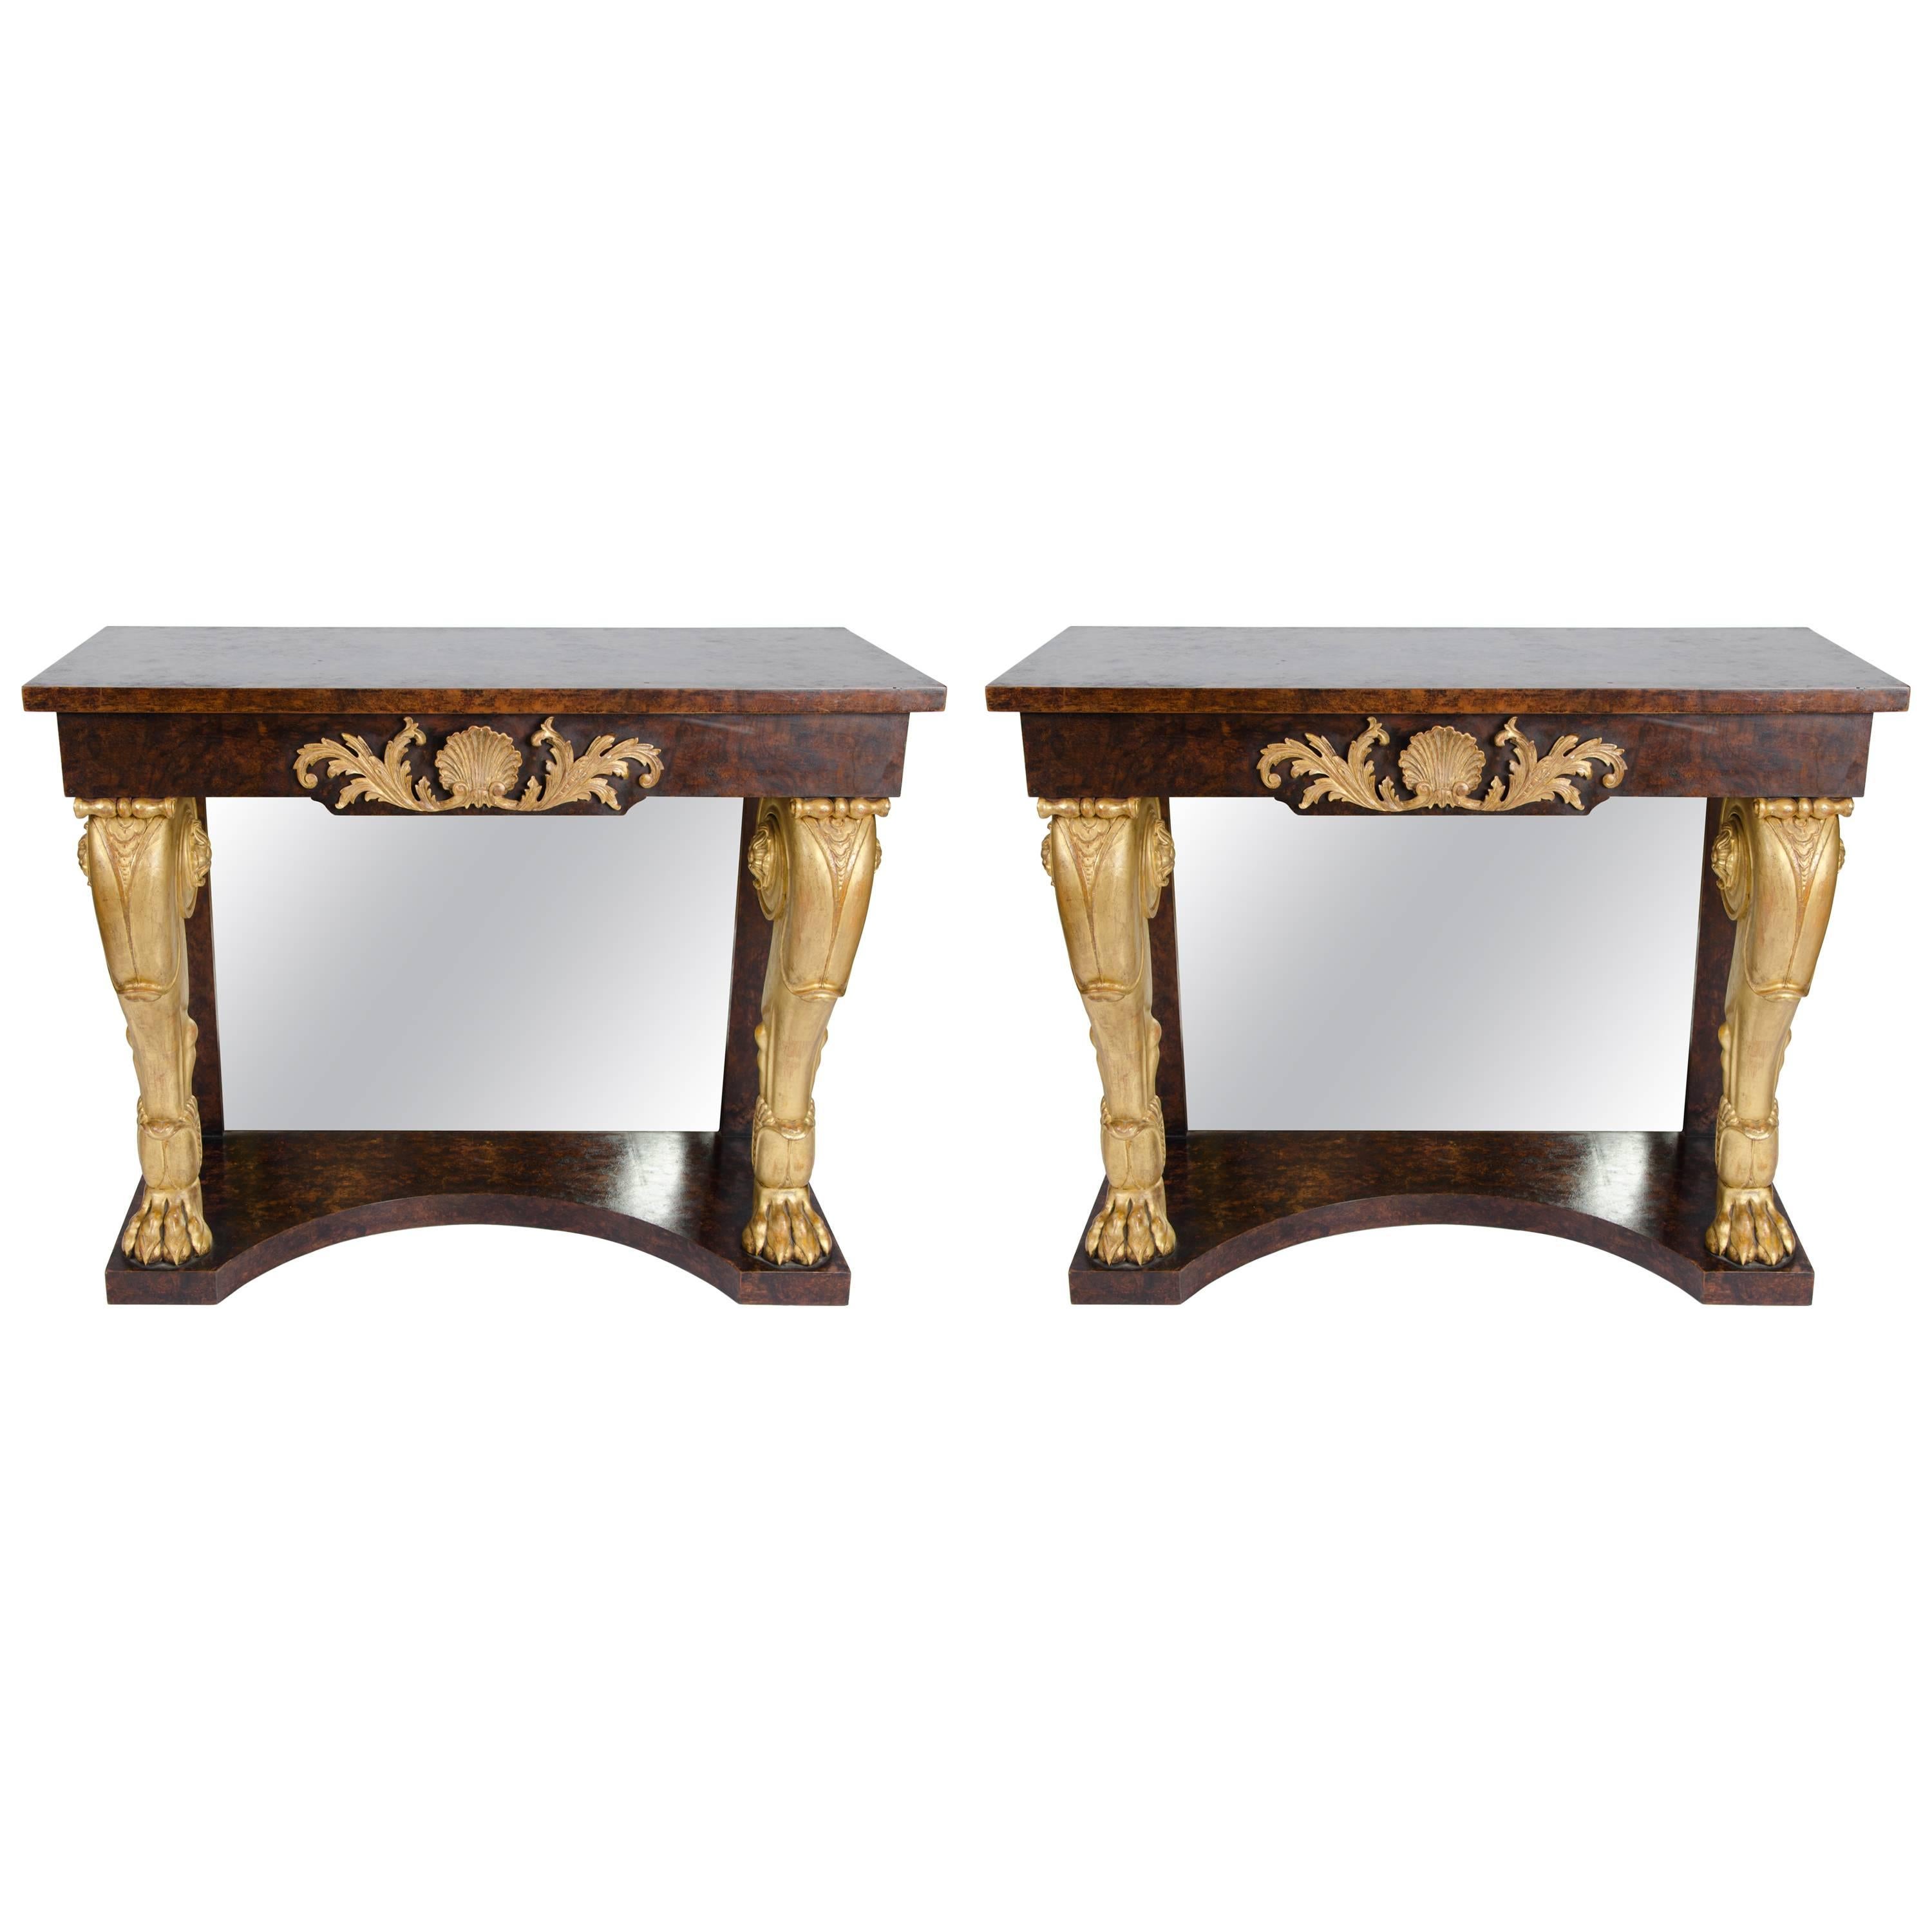 Pair of Late 20th C. Console Tables